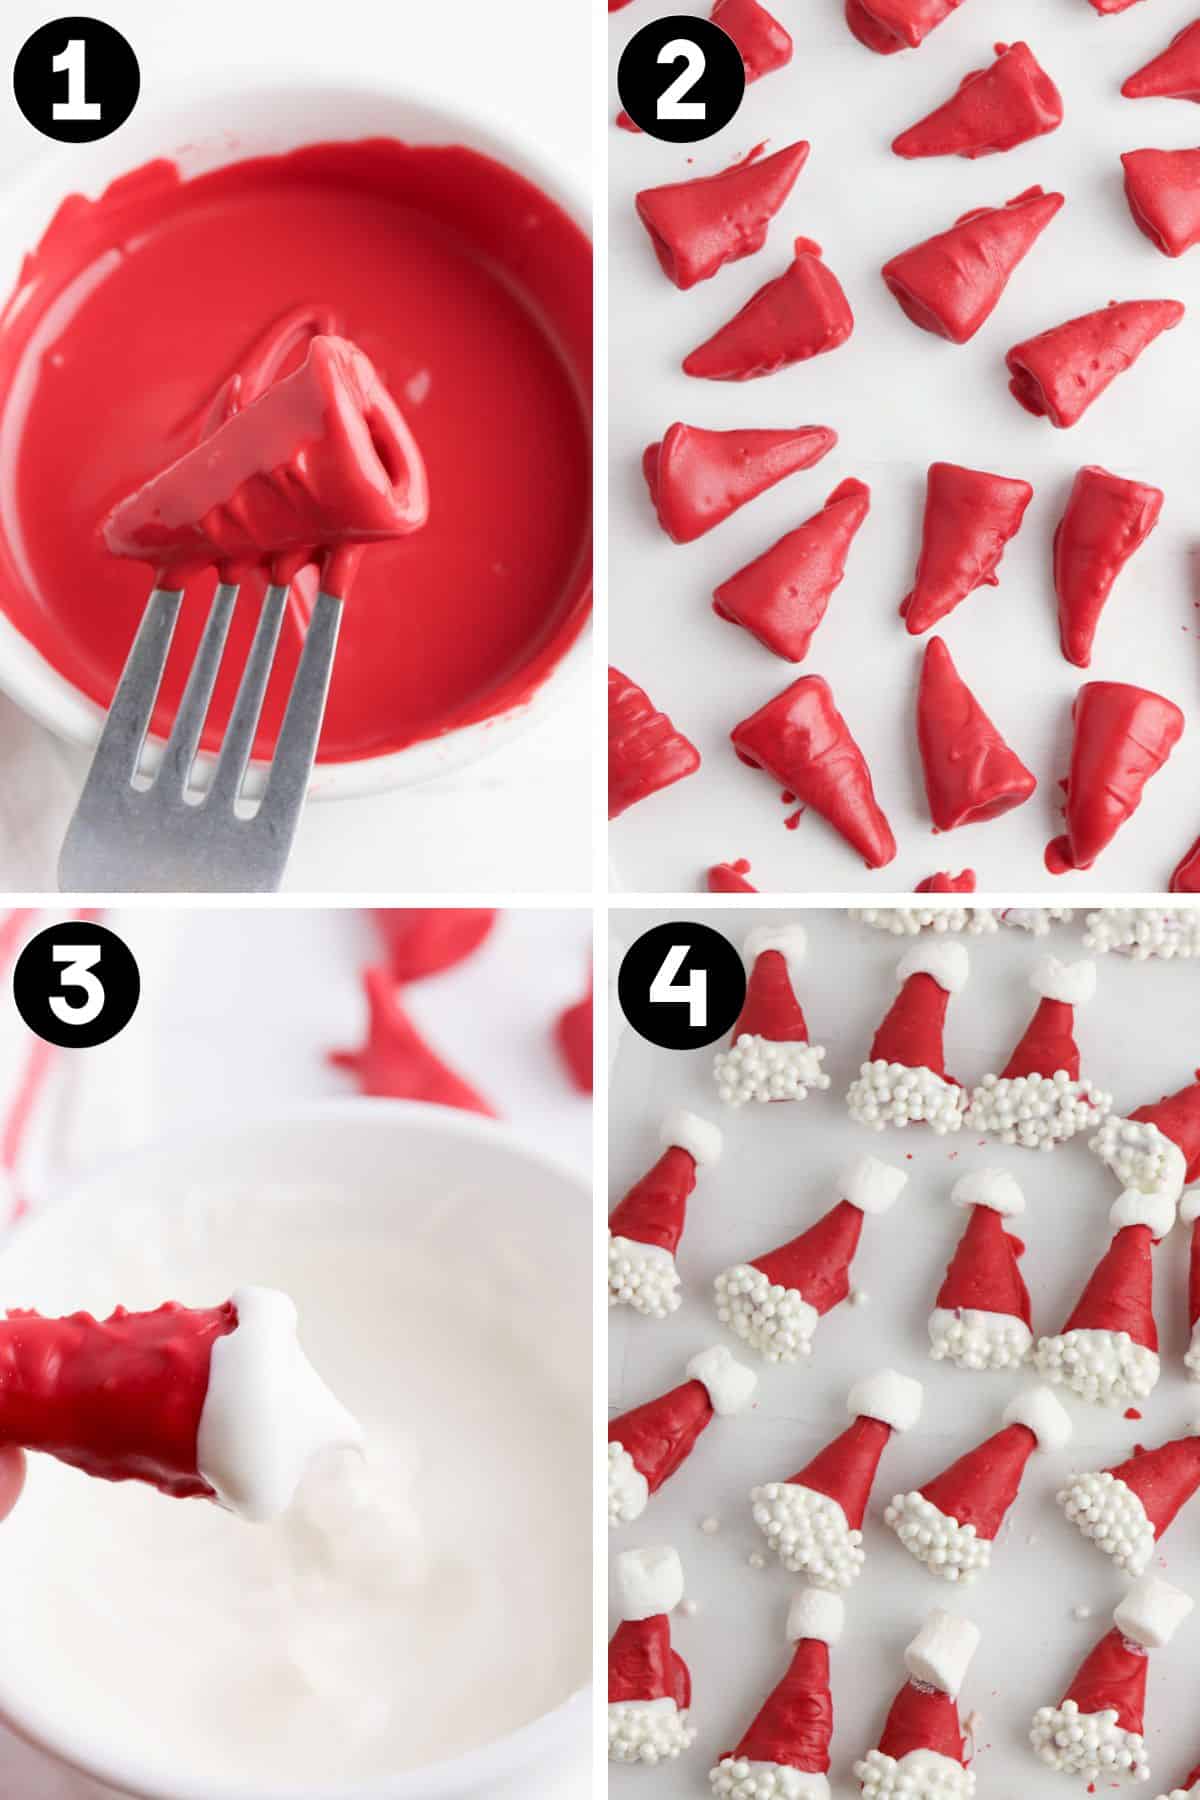 Four image collage of bugle being dipped in red melted candy, red coates bugles on parchment paper, the rim of coated bugles being dipped in melted white candy, and the red bugles with white rims on parchment paper setting.